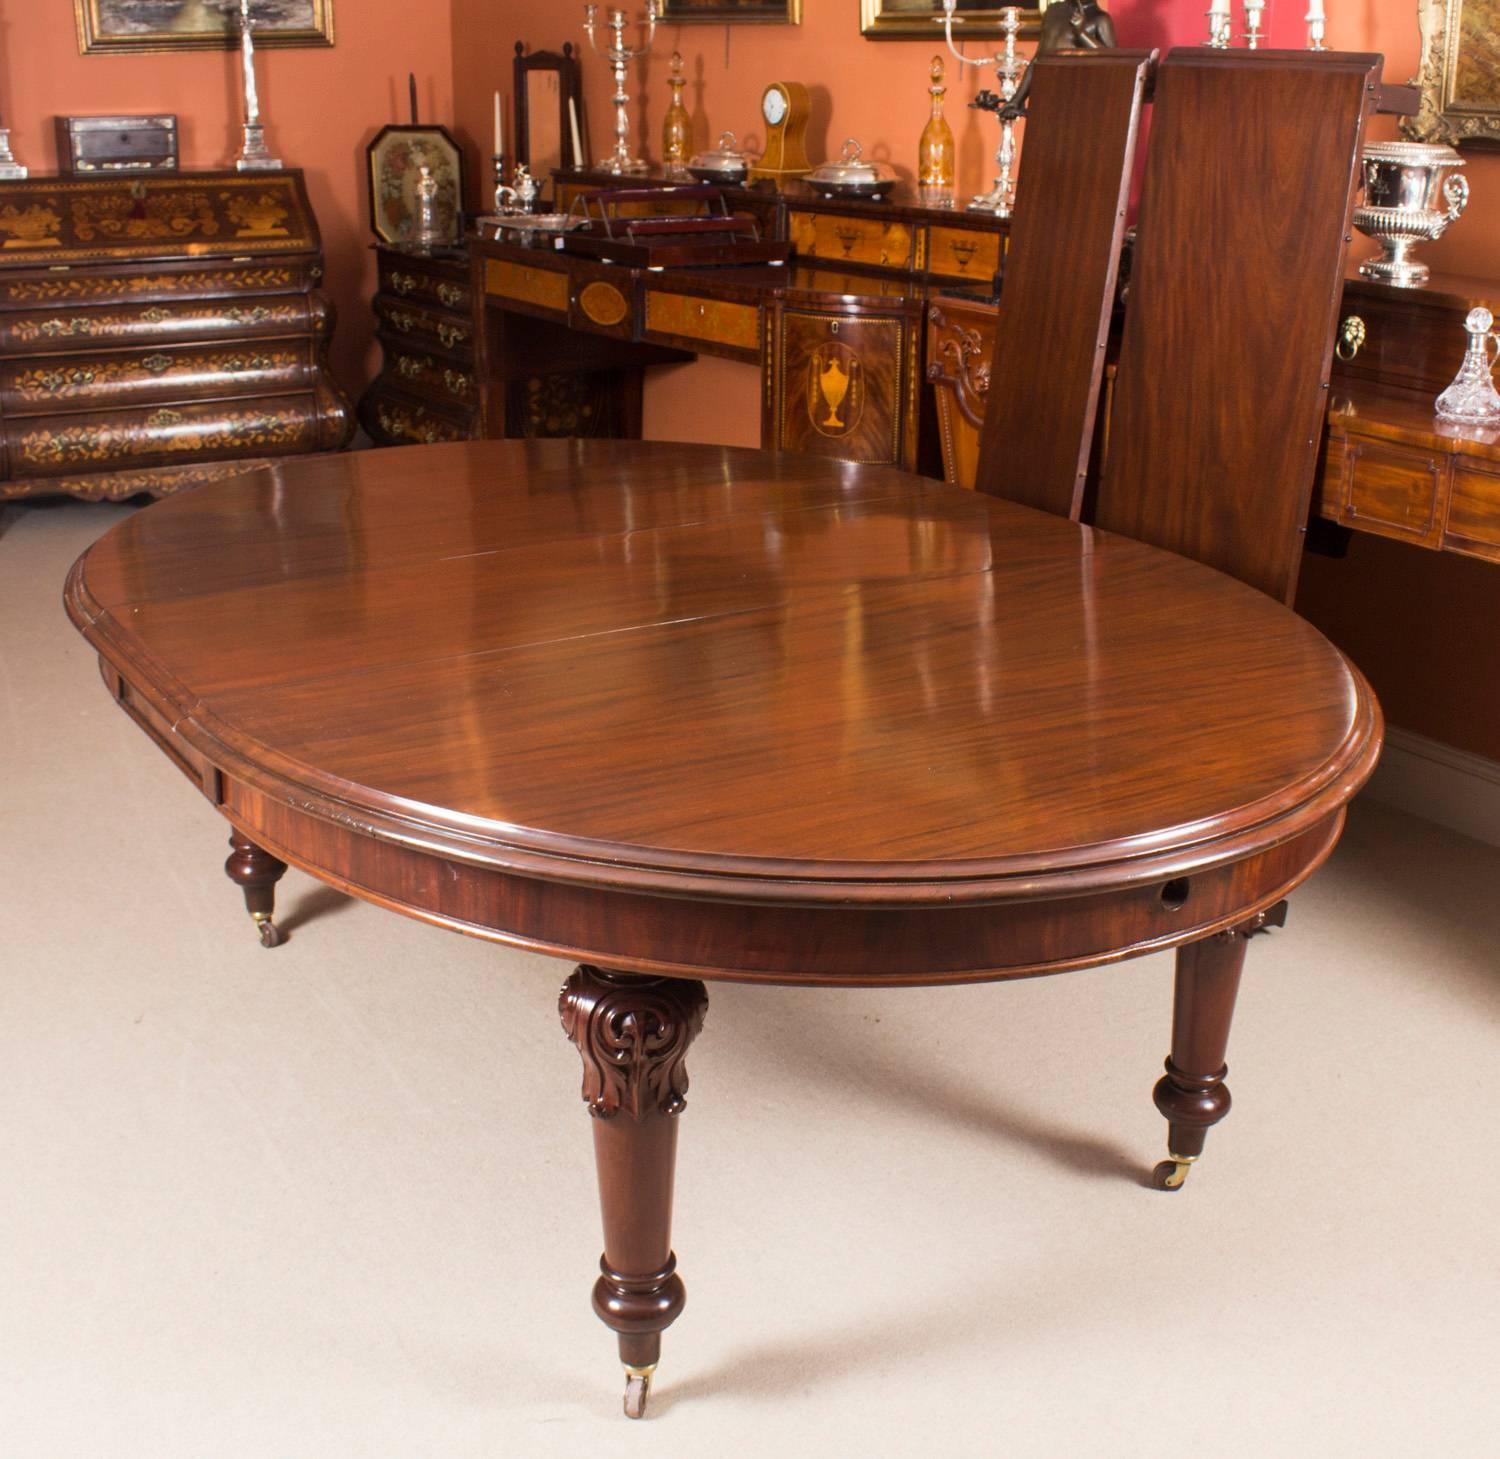 Hand-Crafted 19th Century Victorian Oval Extending Dining Table and Ten Tulip Back Chairs